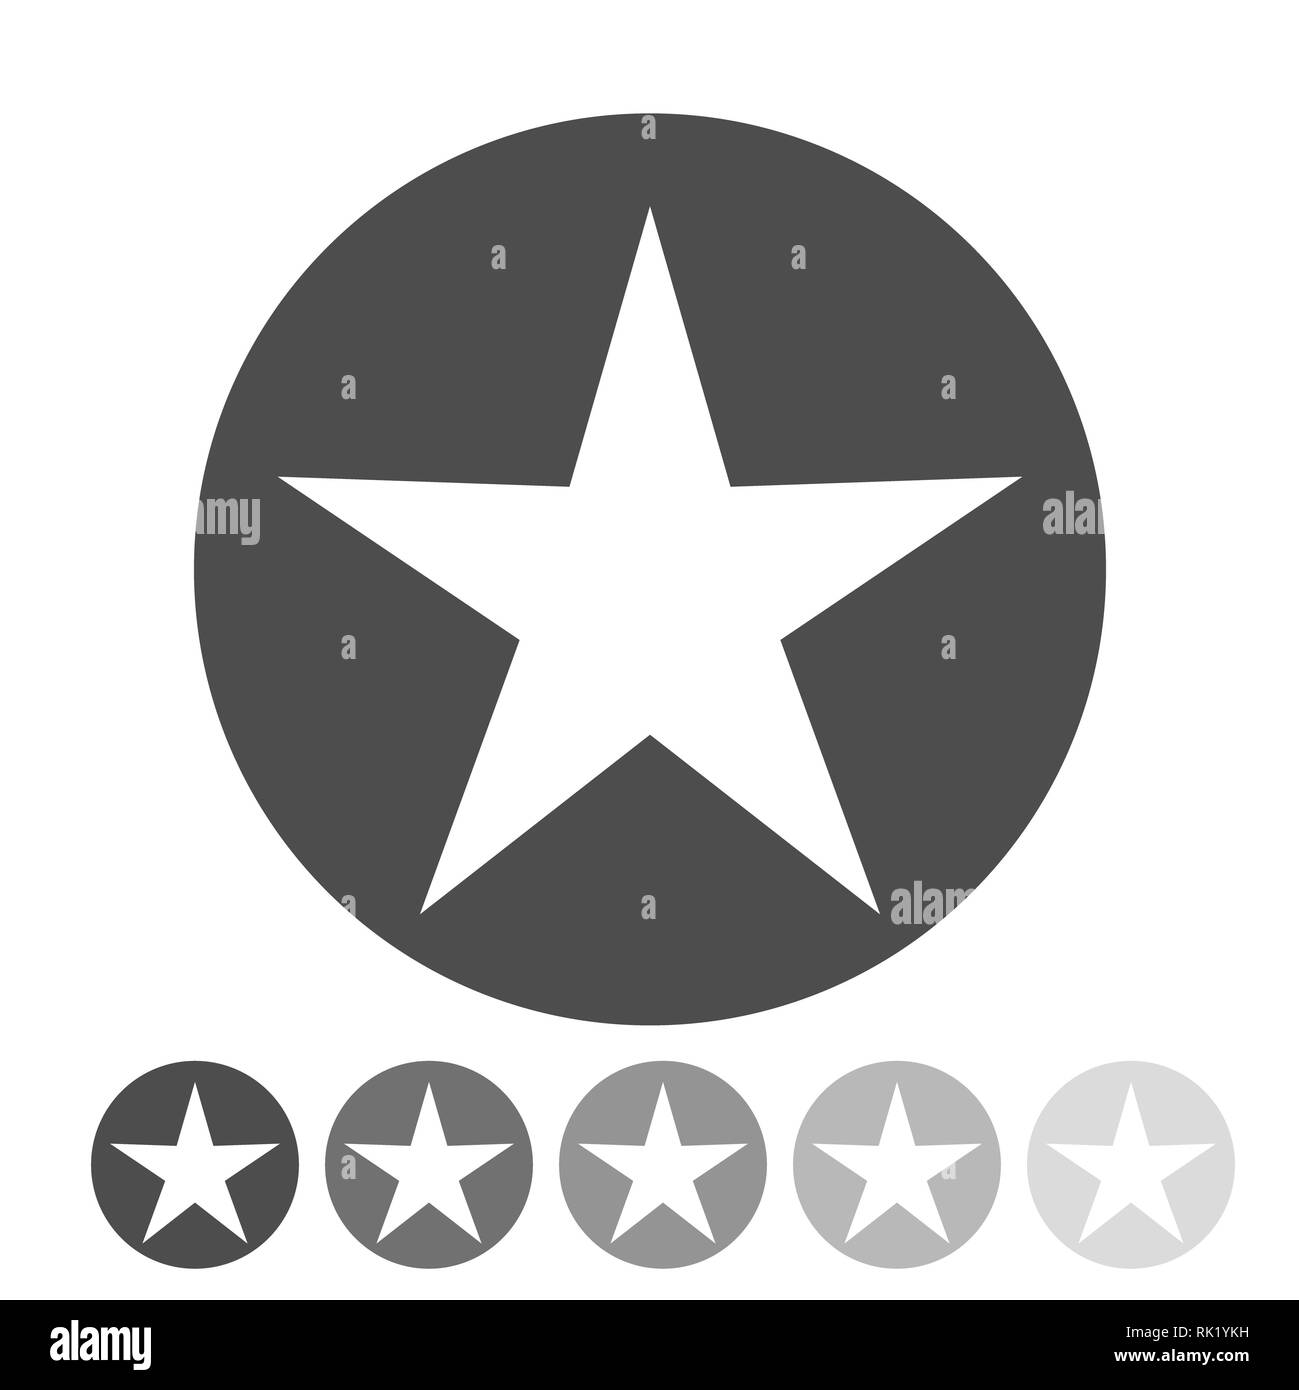 Star inside circle or star stamp flat icon for apps and websites Stock  Vector